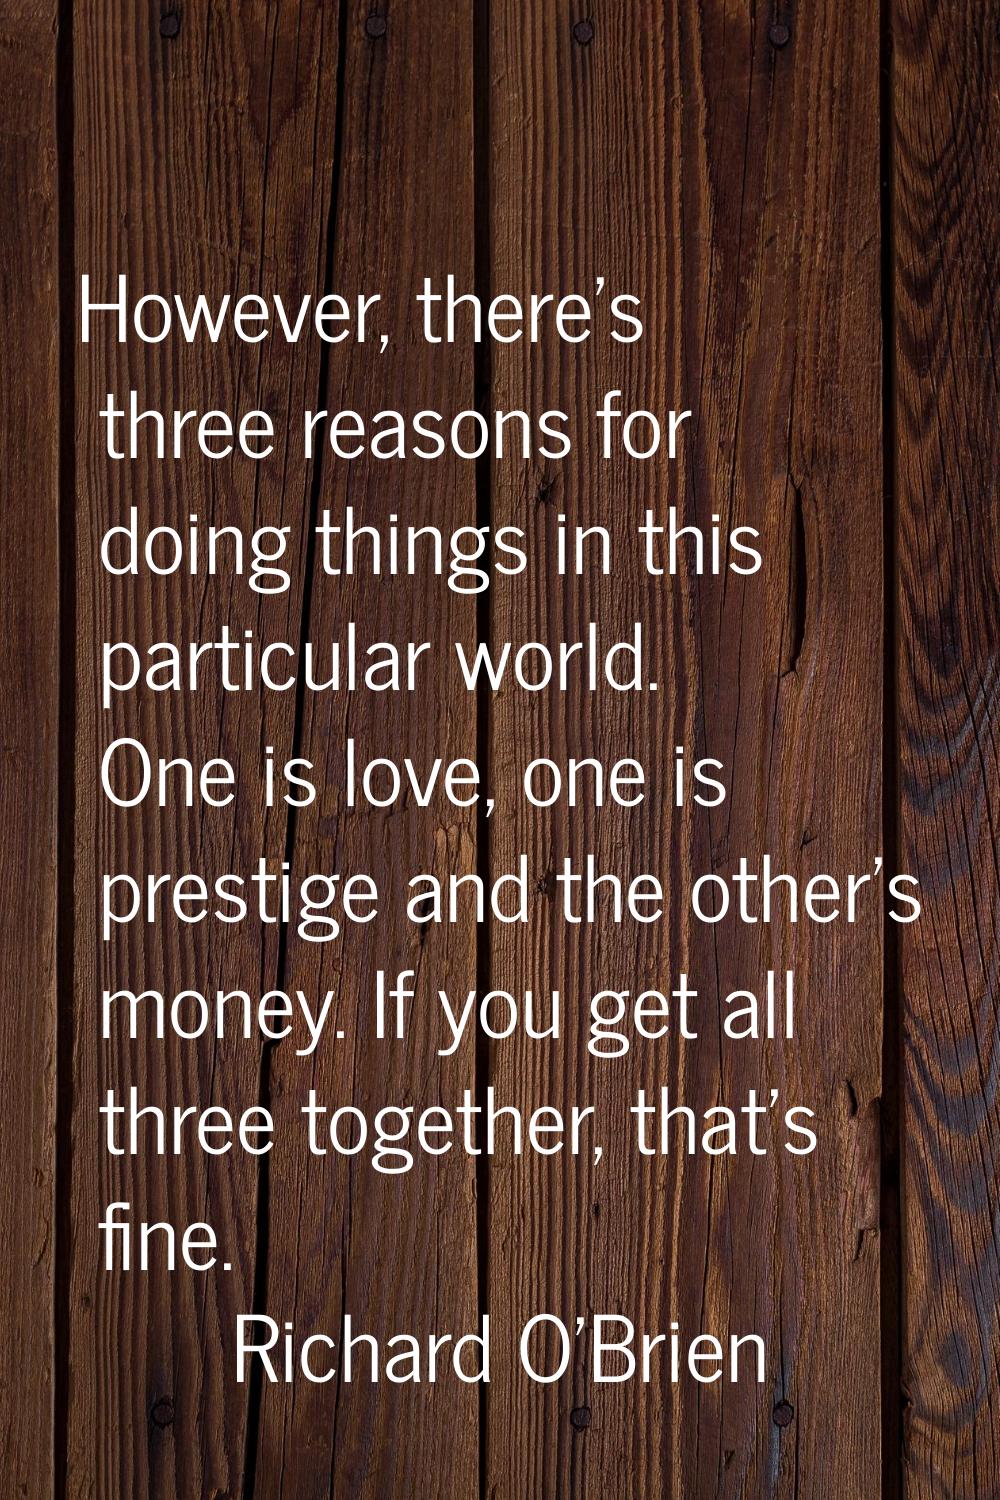 However, there's three reasons for doing things in this particular world. One is love, one is prest